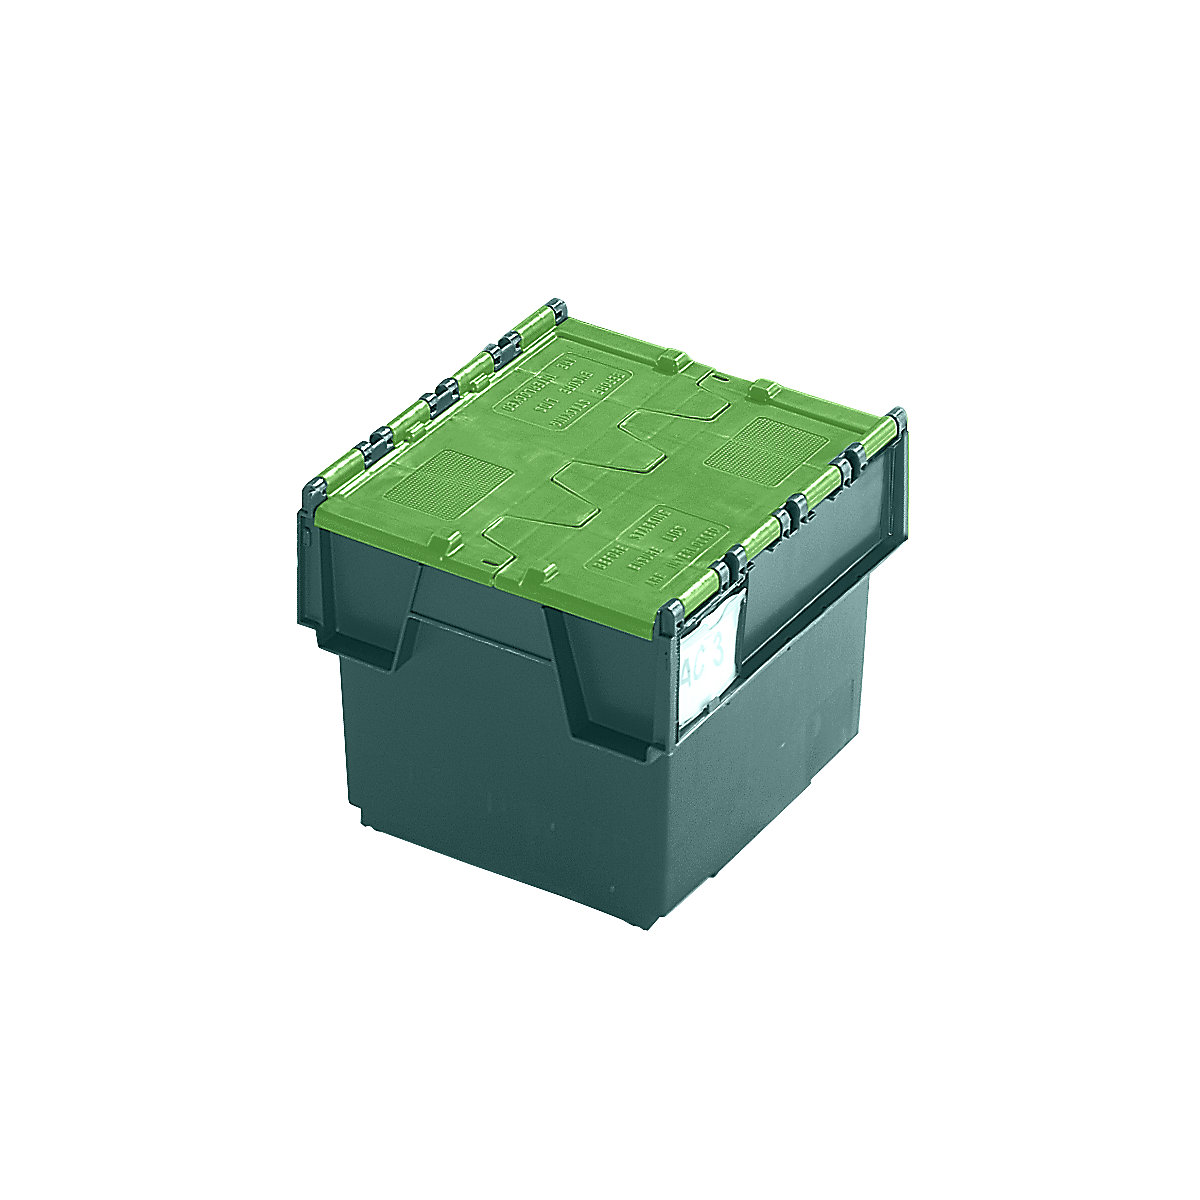 Reusable stacking containers with folding lids, capacity 20 litres, LxWxH 400 x 300 x 252 mm, green, 10+ items